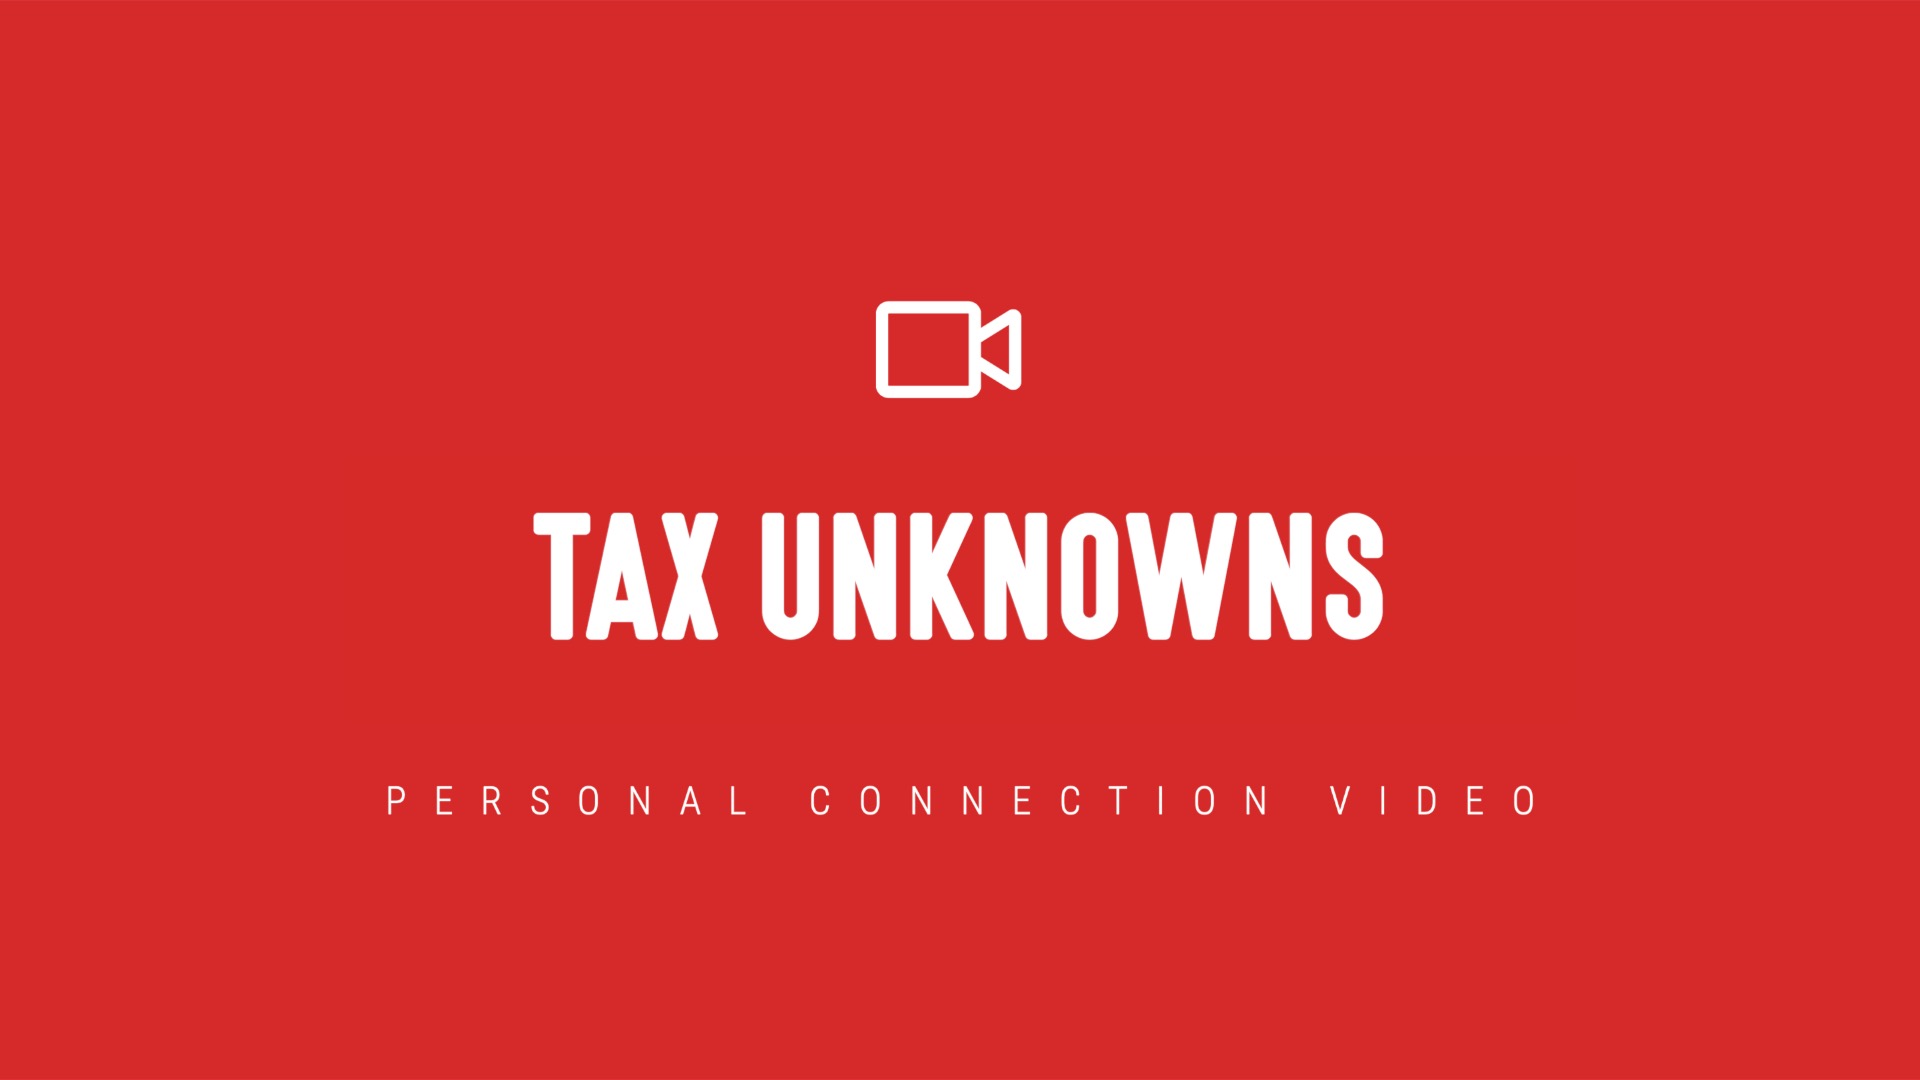 [NEW] Personal Connection Video | Tax Unknowns